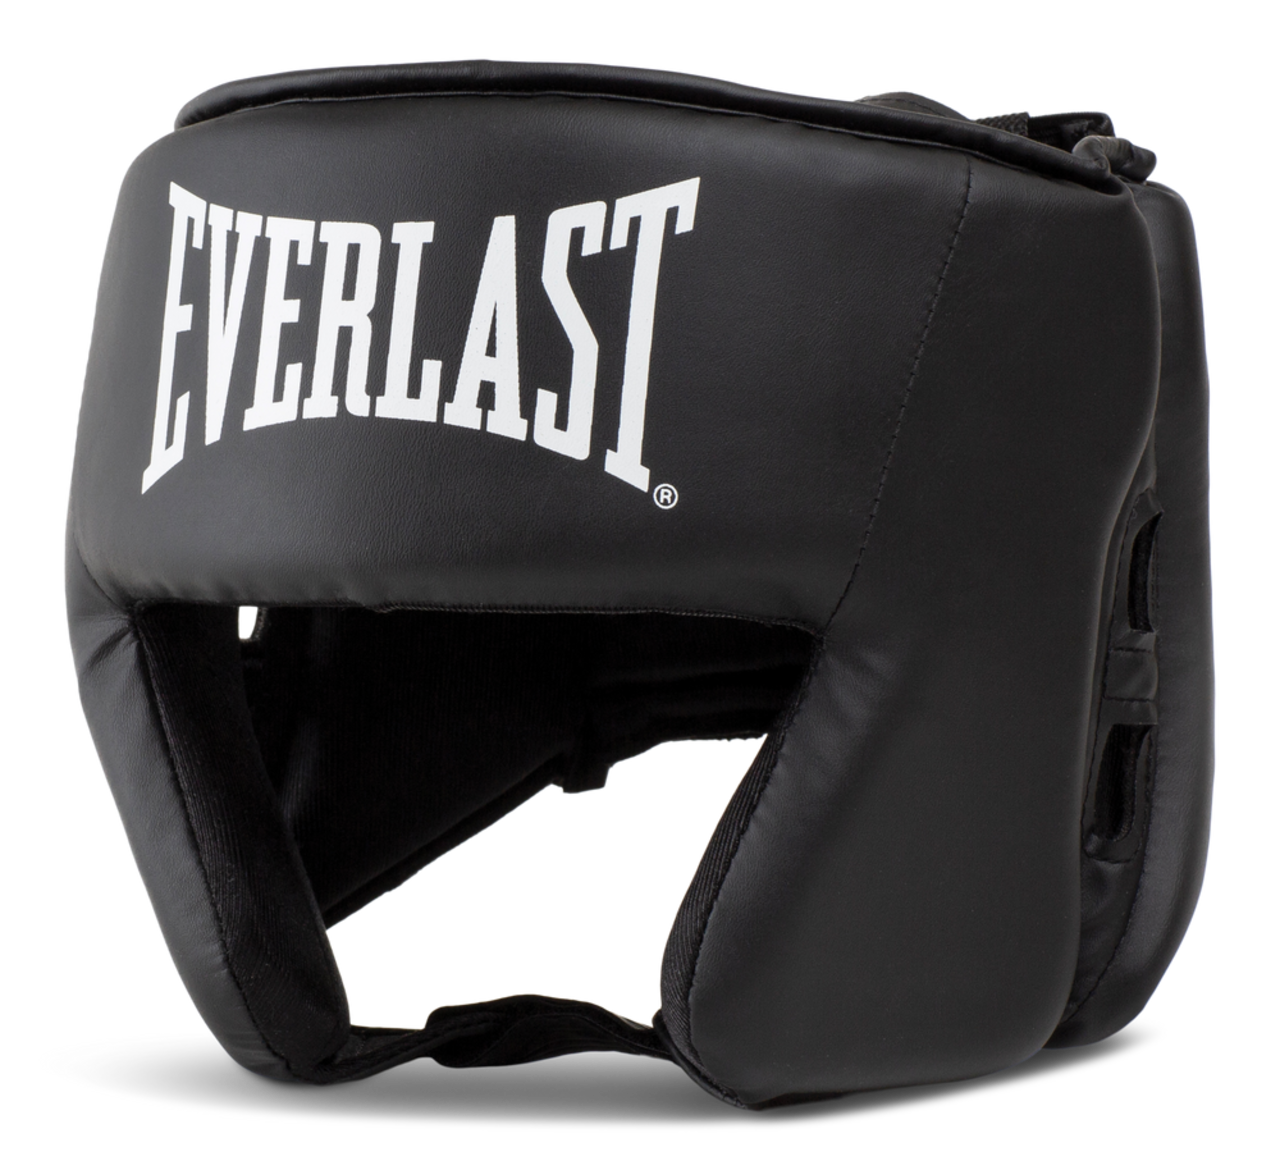 https://media-www.canadiantire.ca/product/playing/exercise/exercise-accessories/1841620/everlast-core-headgear-one-size-15afc131-0d8d-42a4-a3d6-cac7ad661b42.png?imdensity=1&imwidth=640&impolicy=mZoom